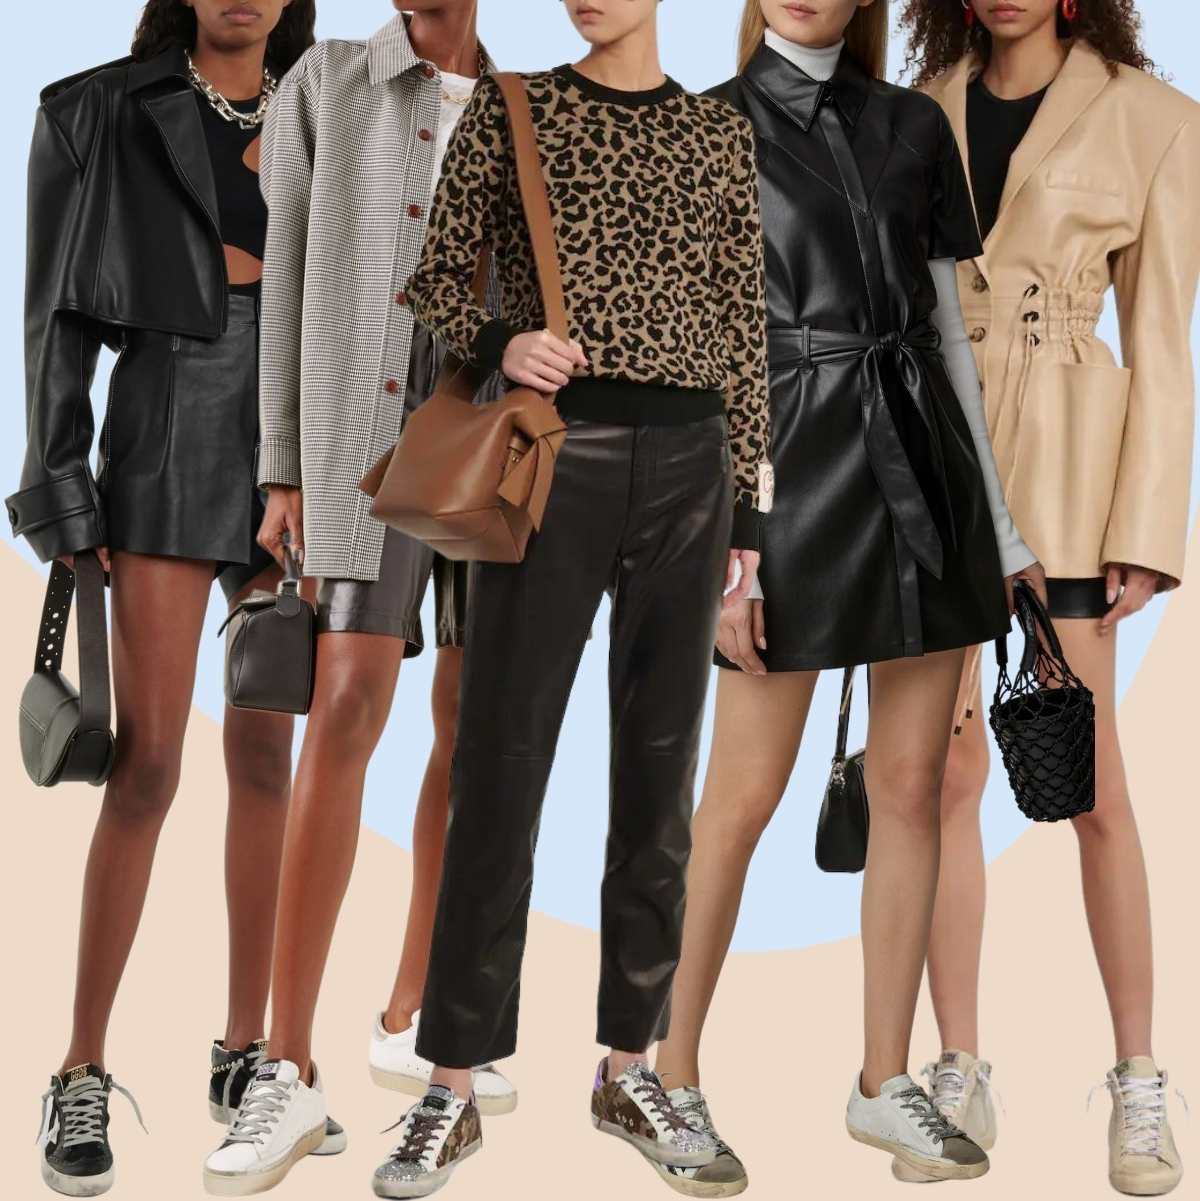 Collage of 5 women wearing different golden goose outfits with leather.